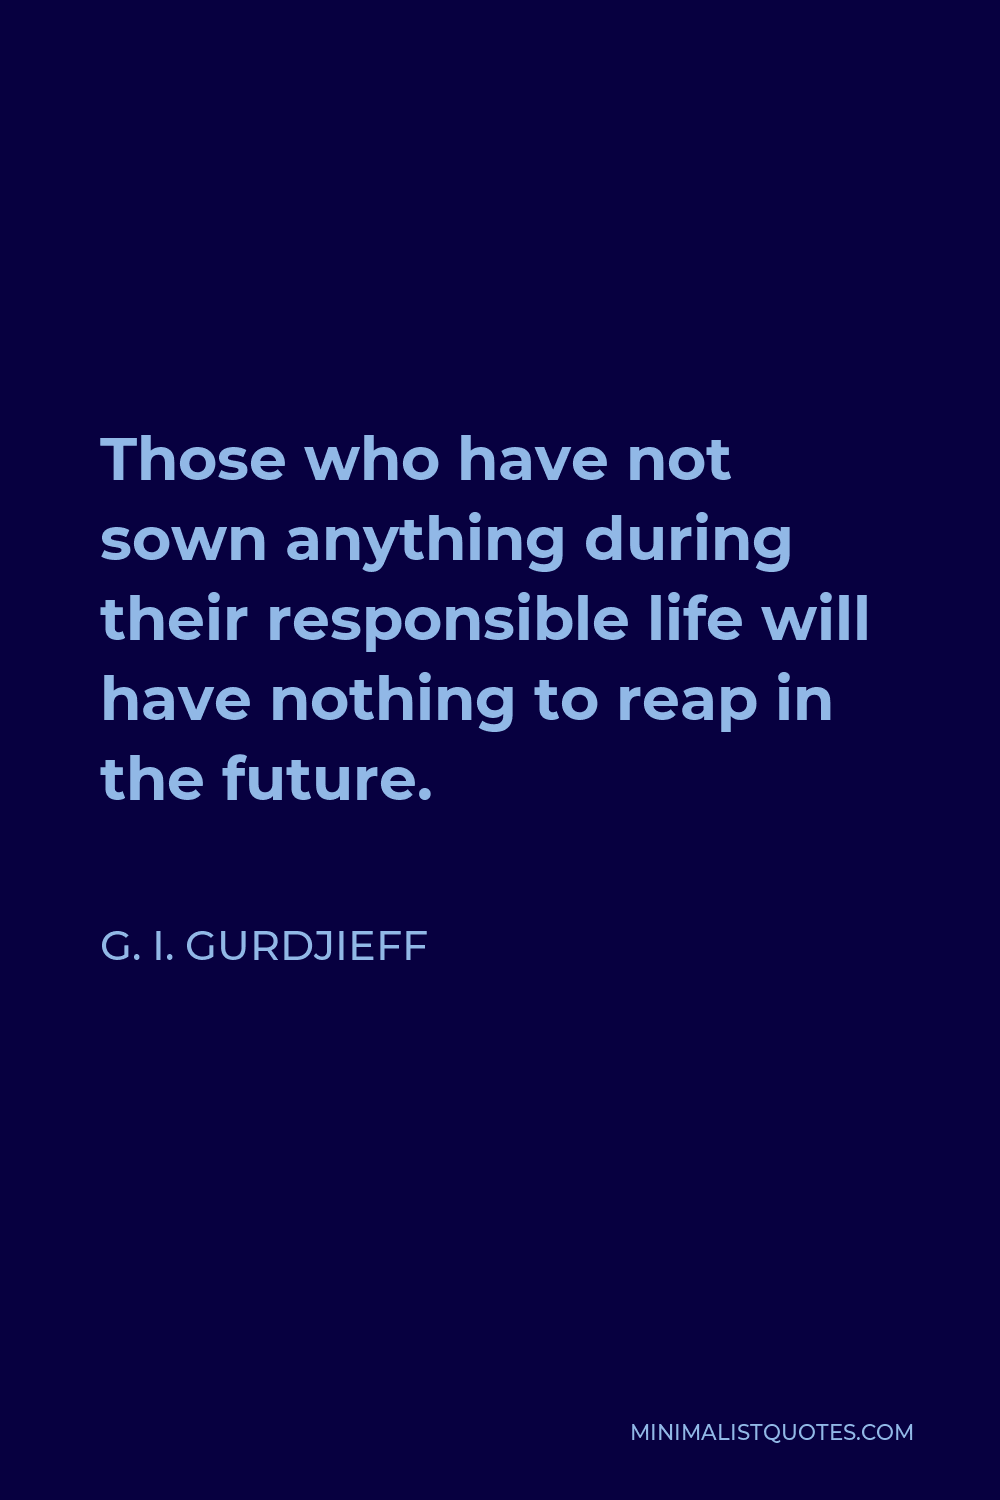 G. I. Gurdjieff Quote - Those who have not sown anything during their responsible life will have nothing to reap in the future.